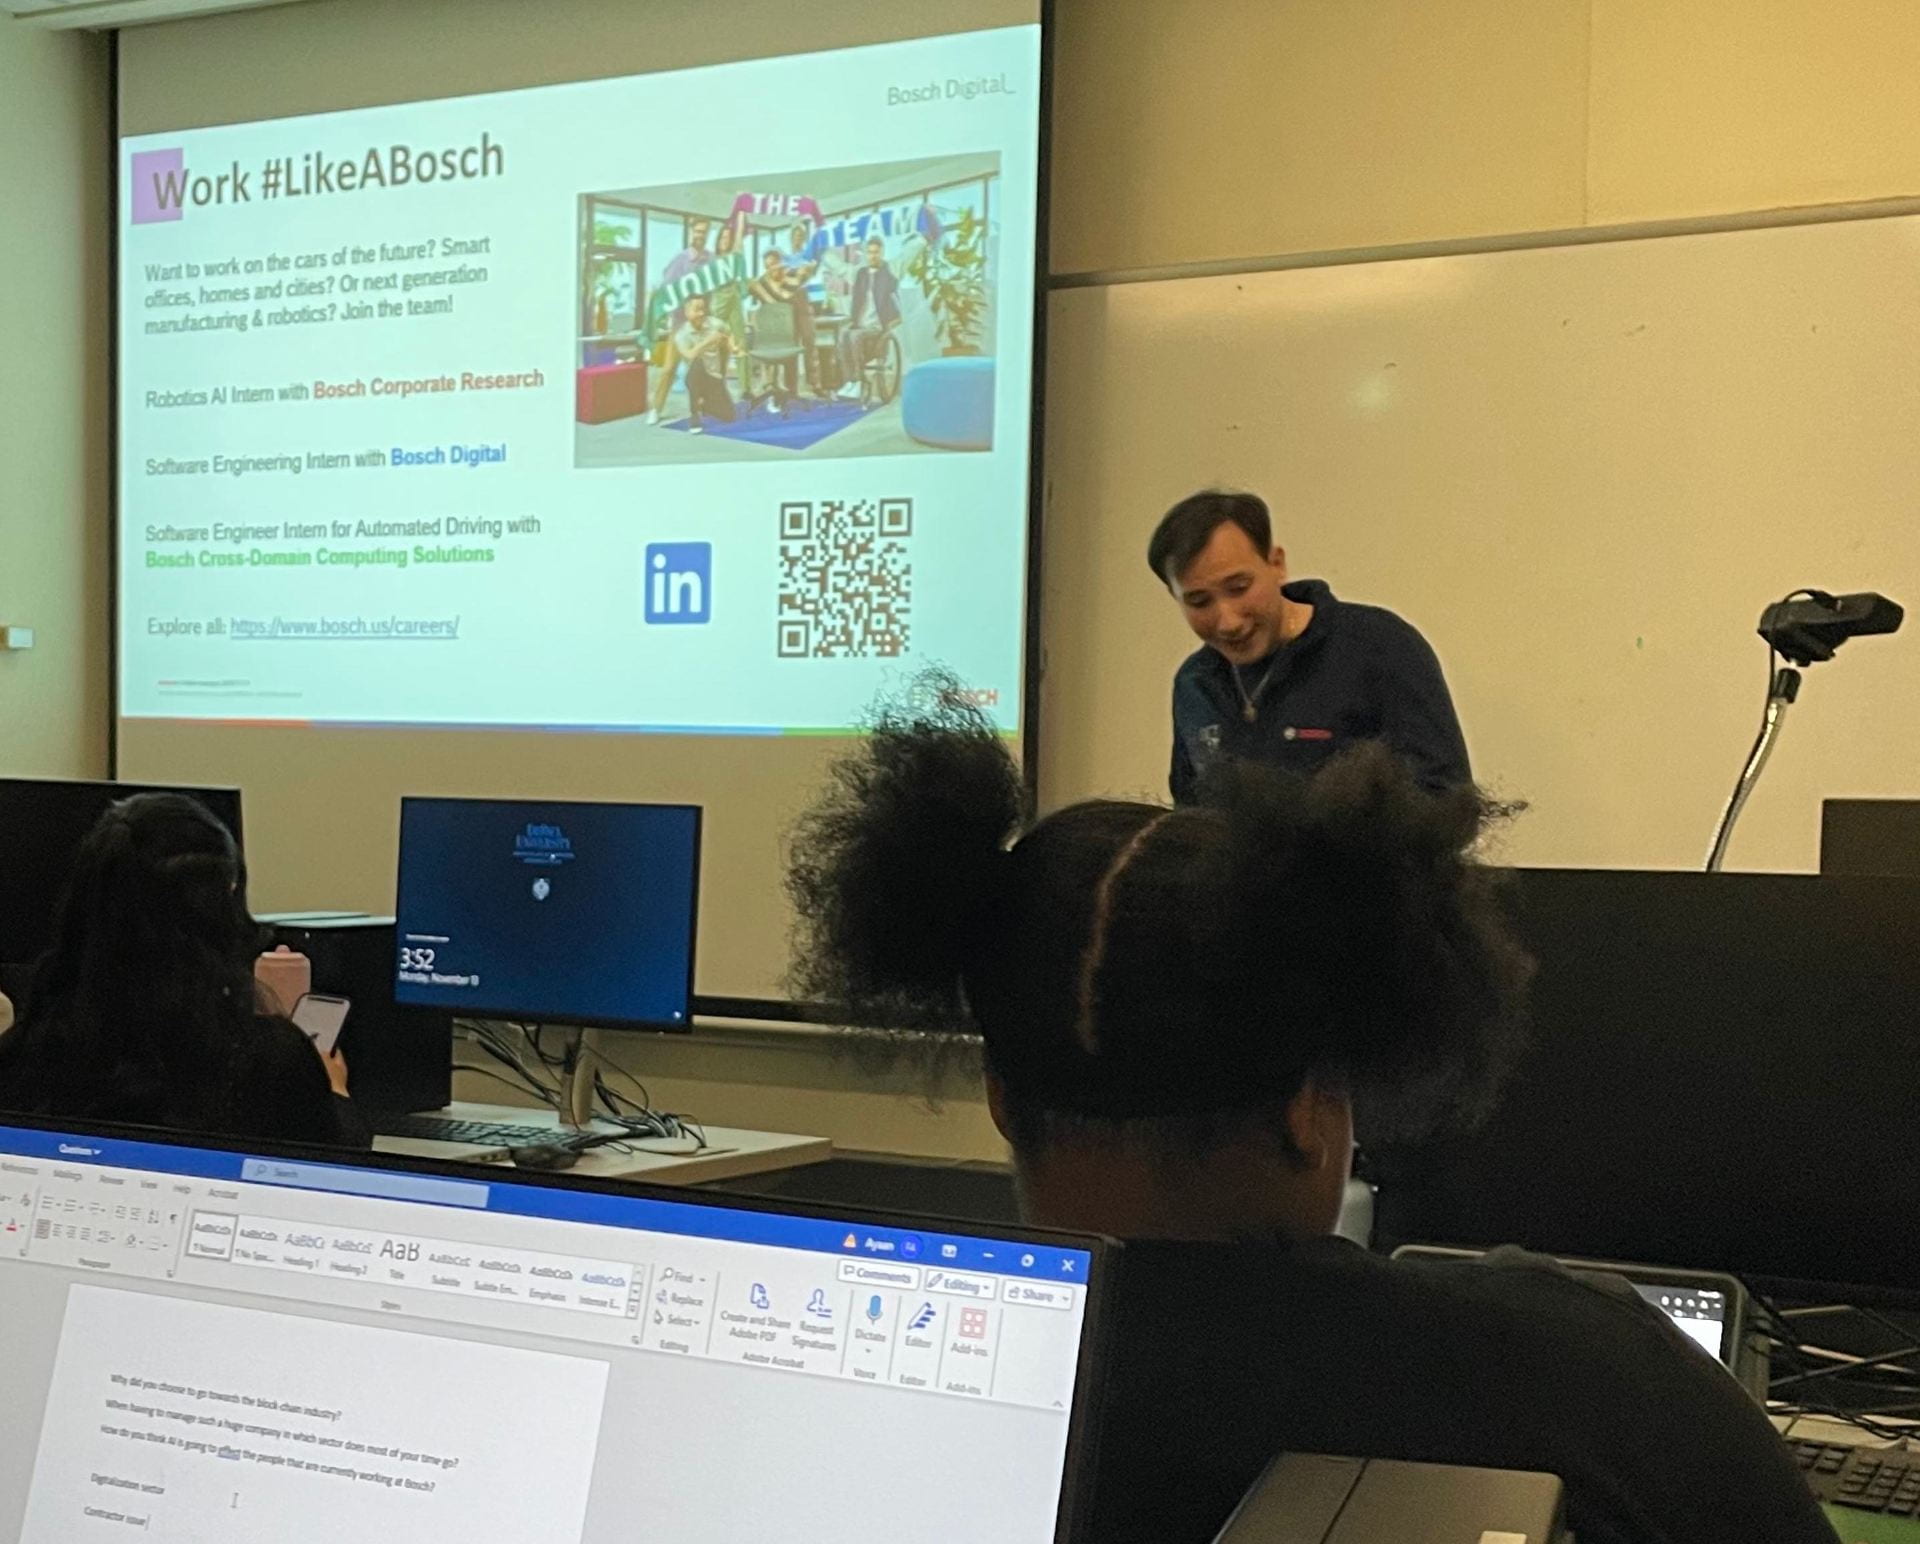 A speaker from Bosch presents about what it’s like to work at the company during a meeting of the DePaul University Computer Science Society.